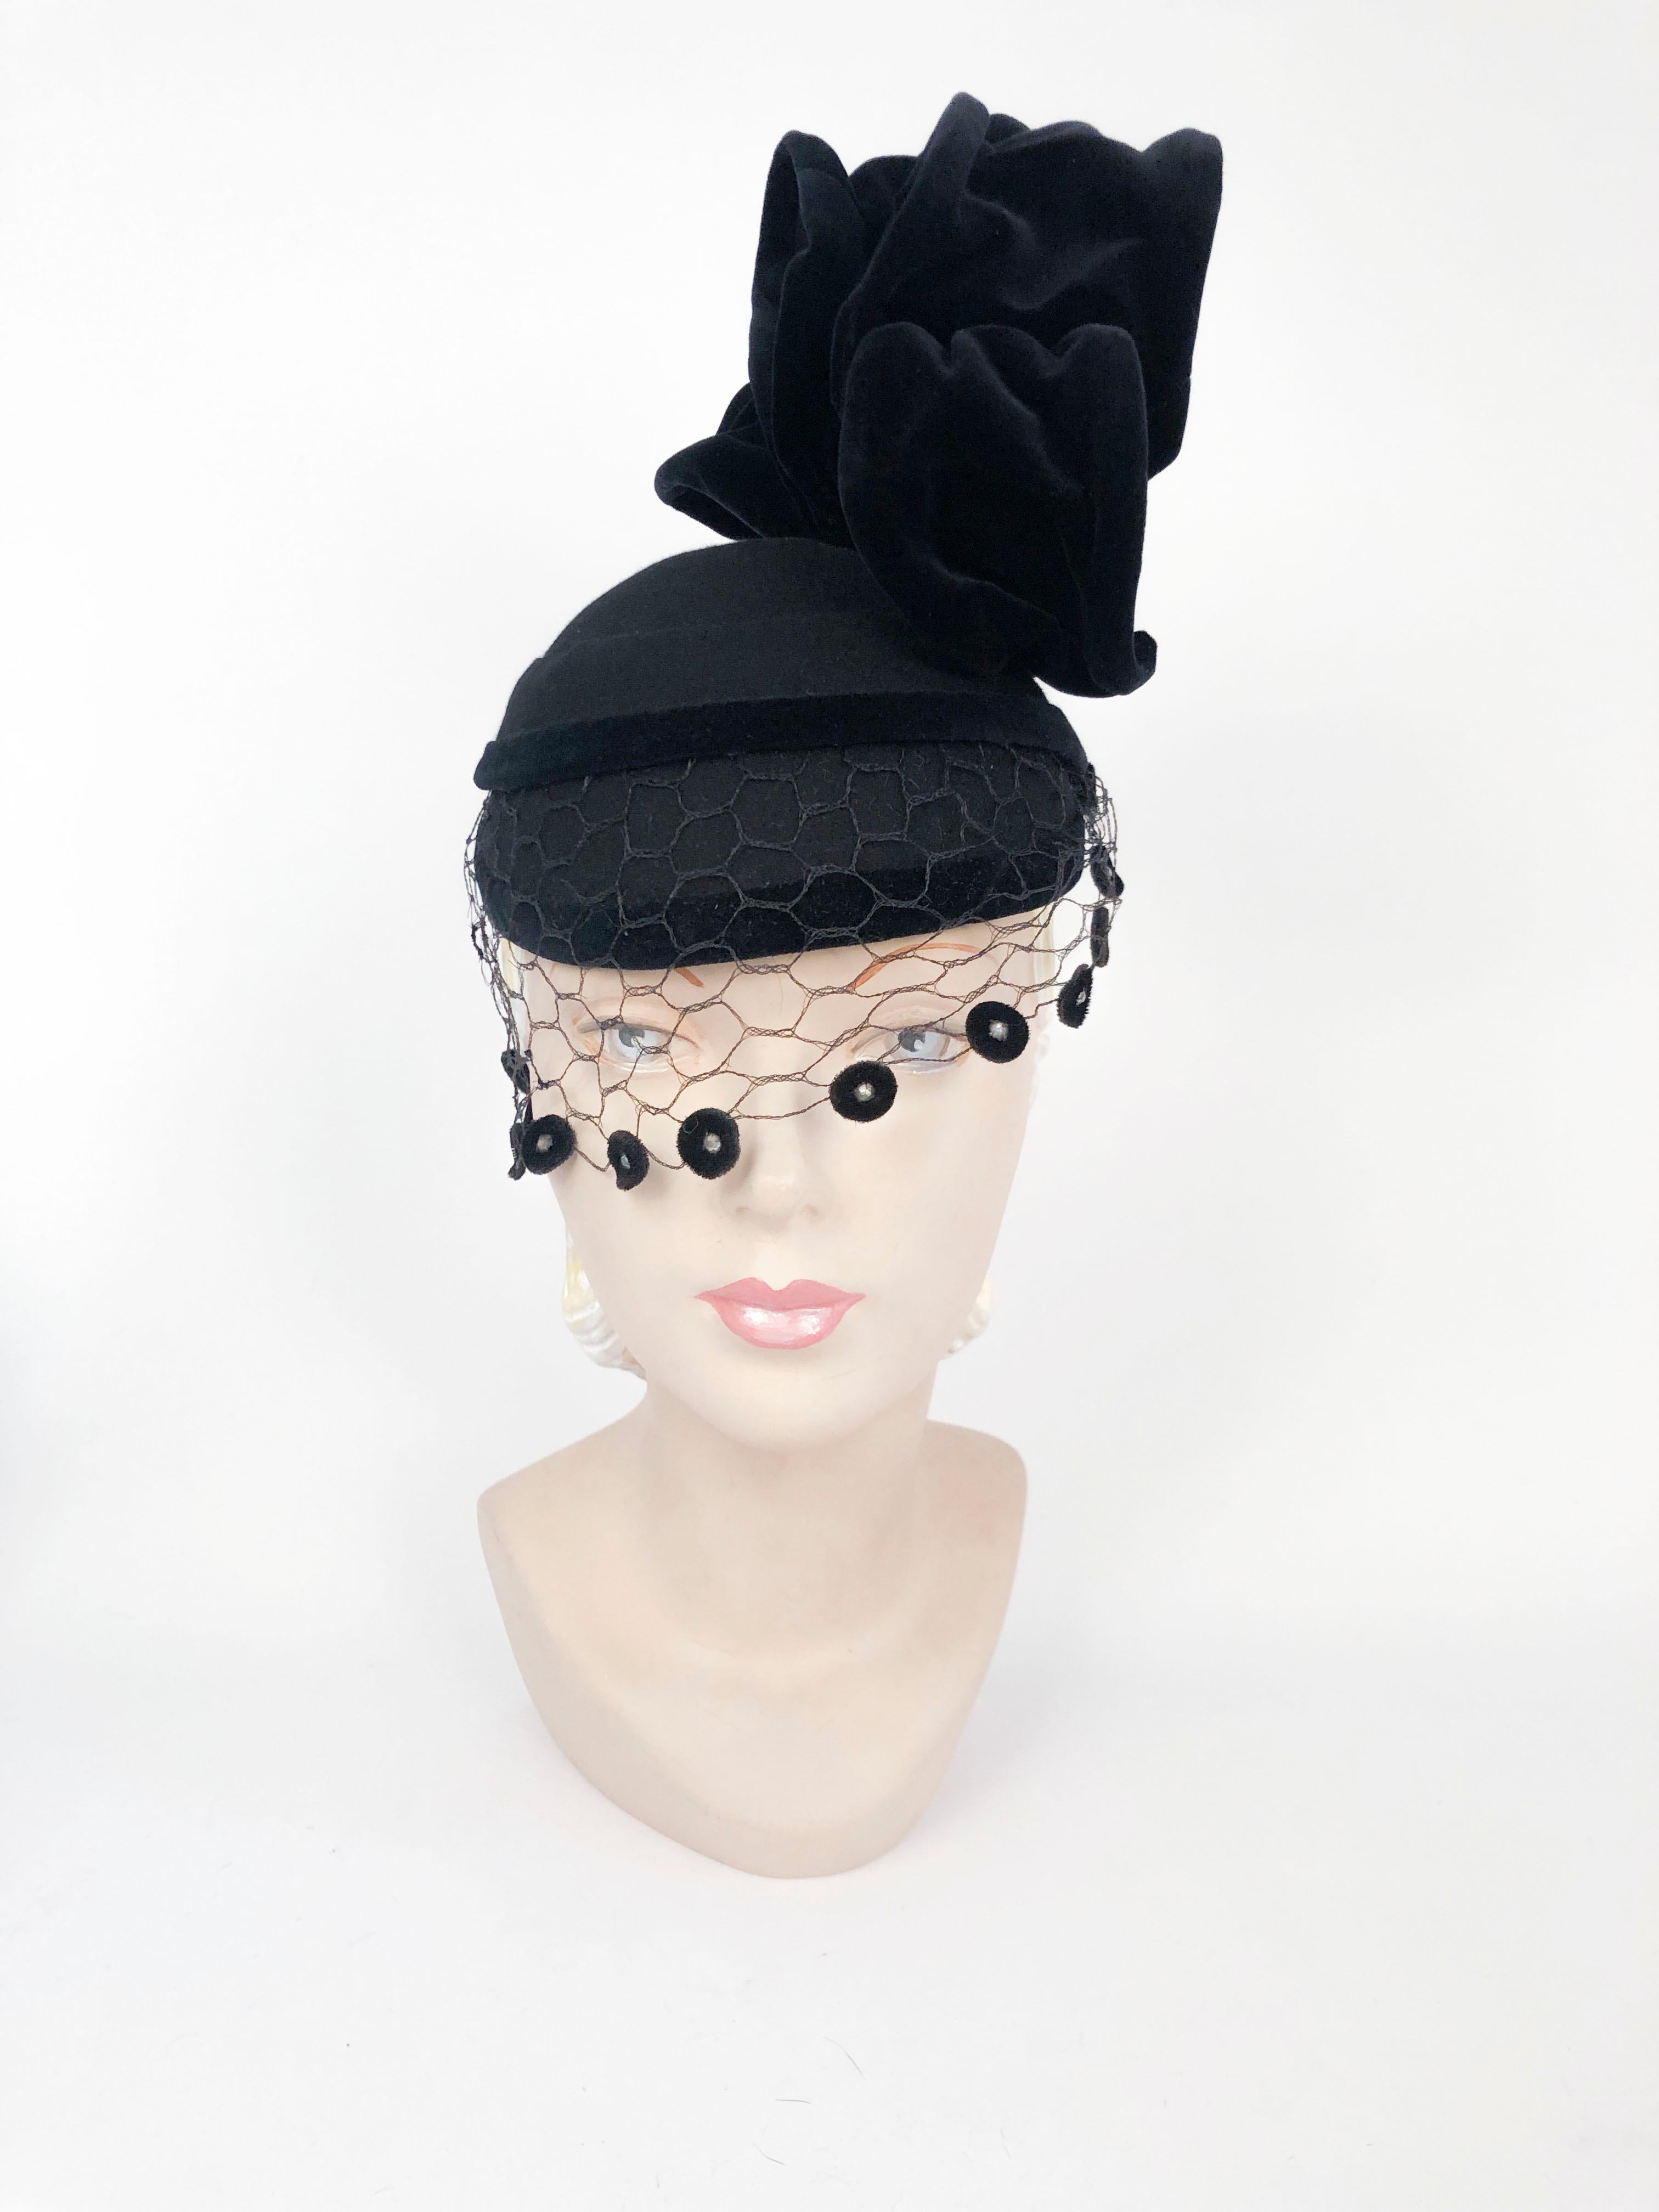 1930s Perch hat made of a black beaver fur felt trimmed in velvet and decorated with a structured fan accent atop the head and a partial veil decorated with velvet discs and set rhinestones. 